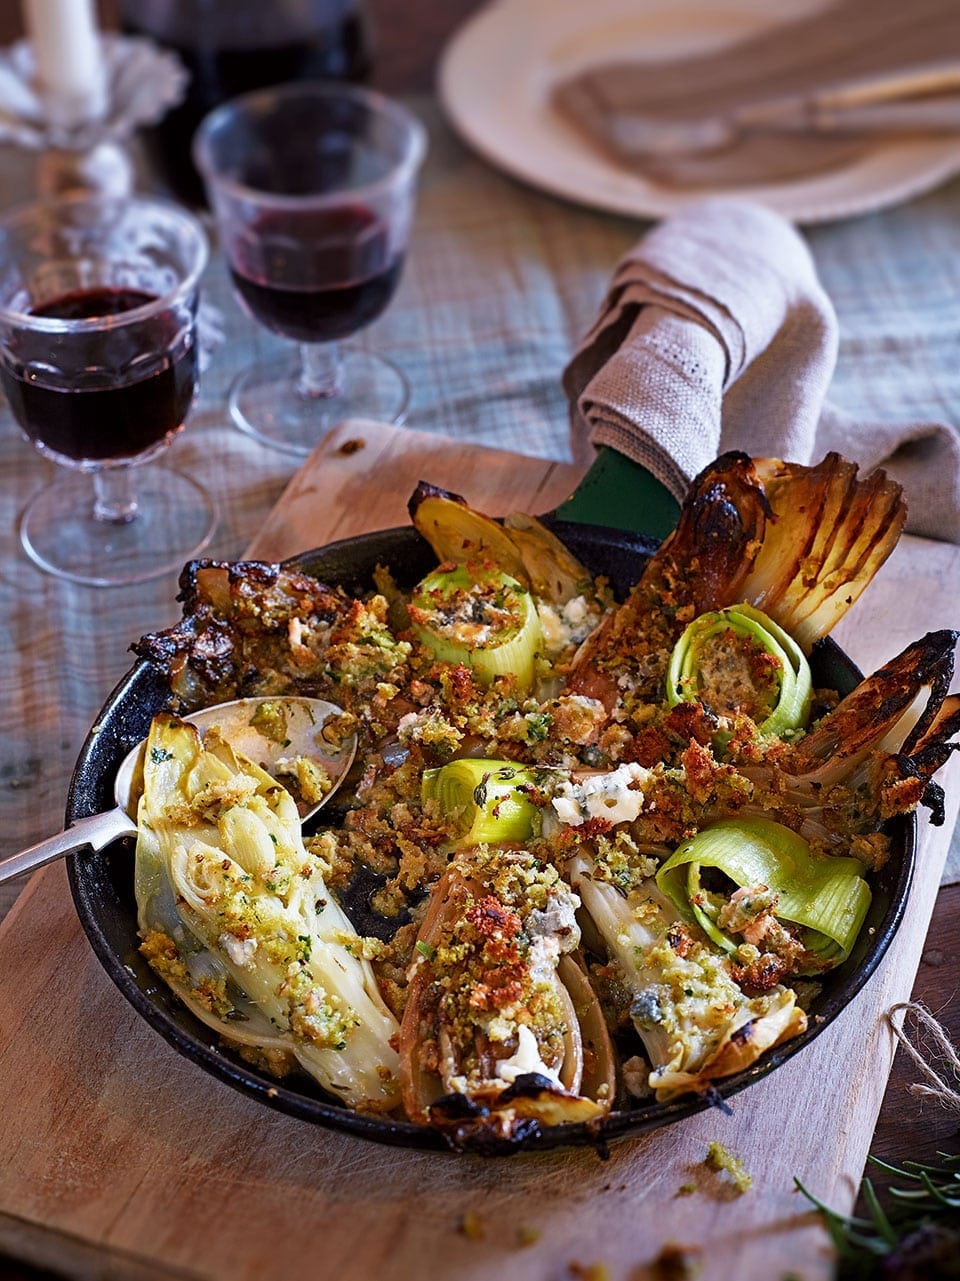 Braised chicory and leeks with lanark blue cheese recipe | delicious ...